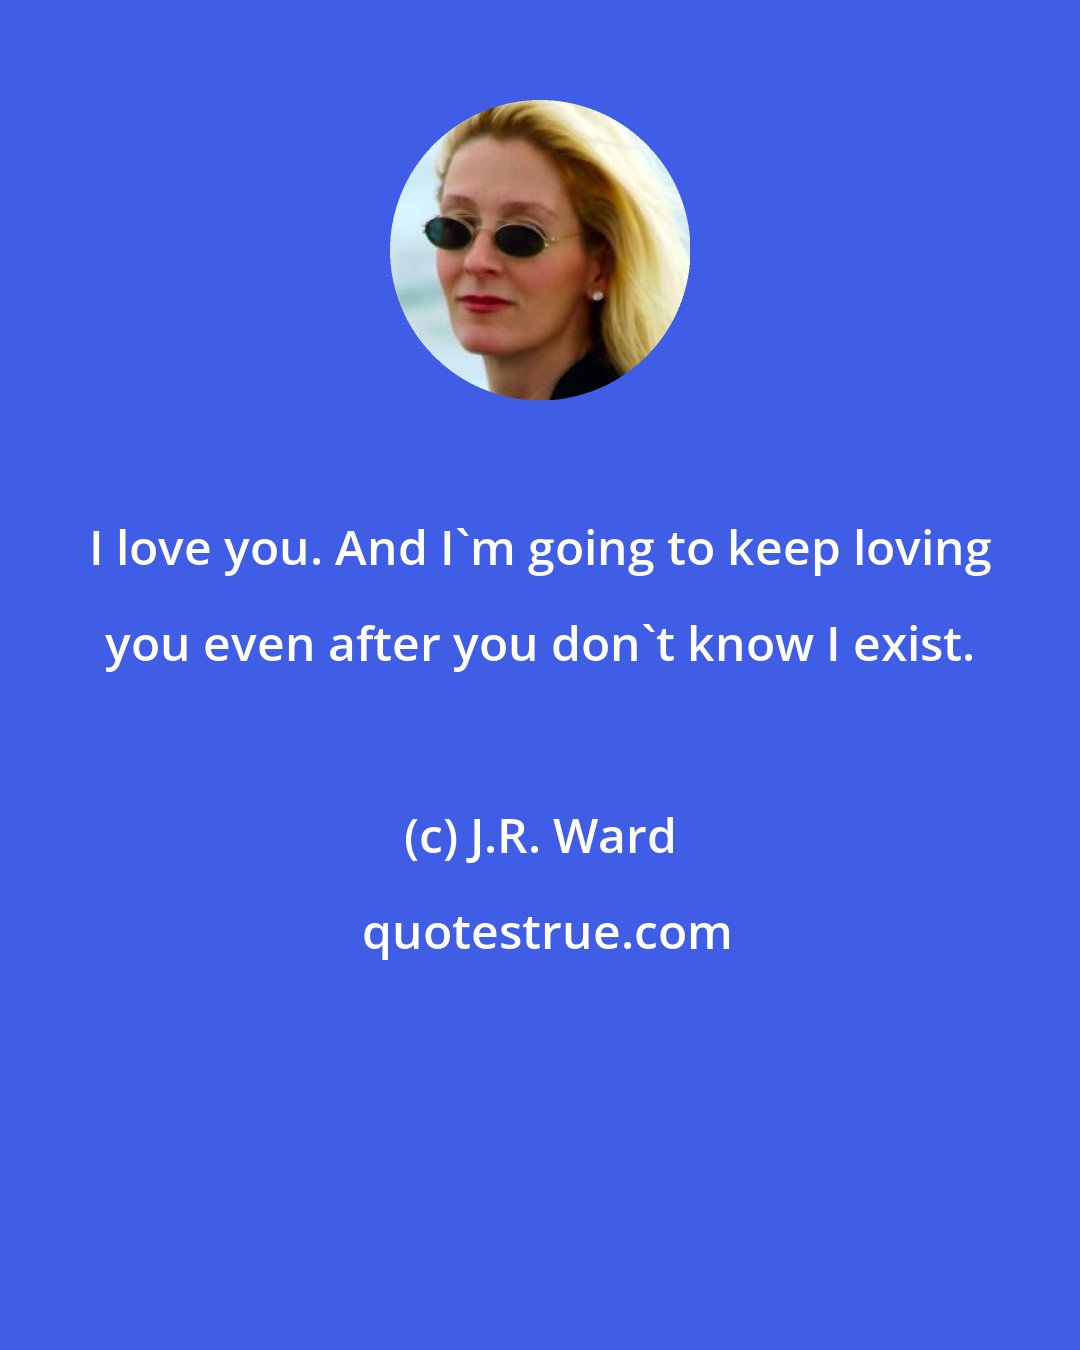 J.R. Ward: I love you. And I'm going to keep loving you even after you don't know I exist.